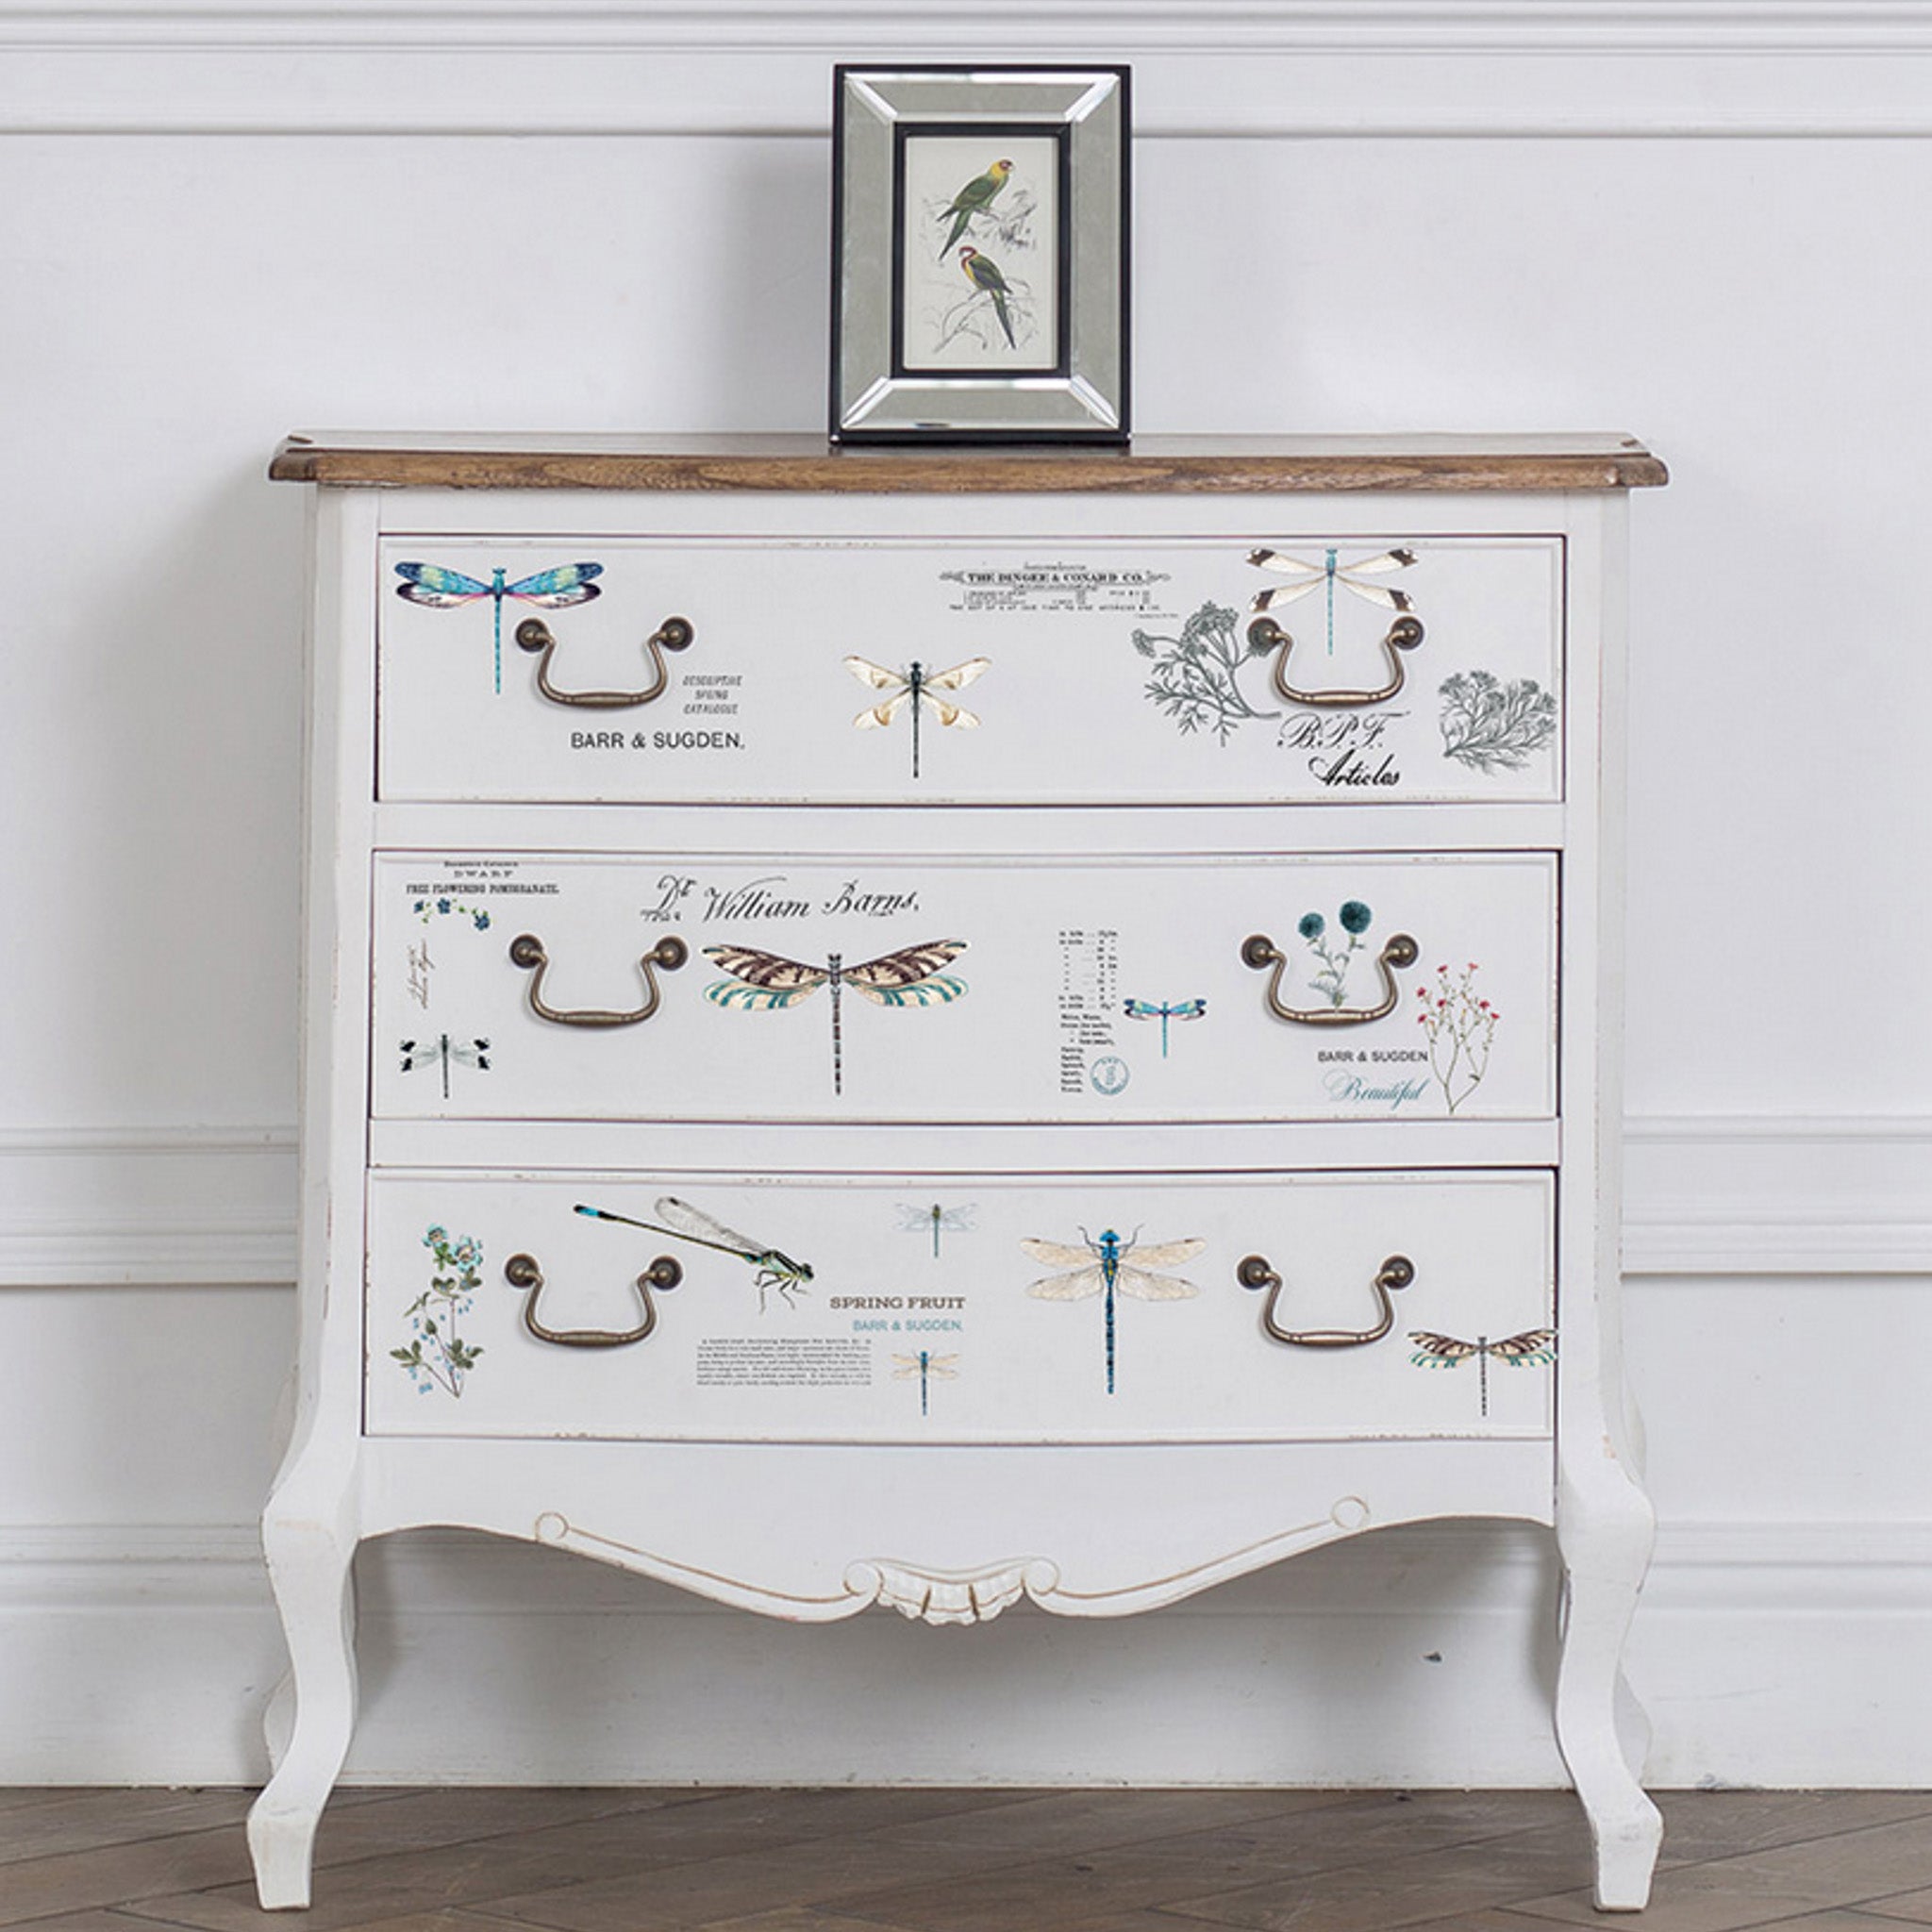 A vintage 3-drawer dresser is painted white and features ReDesign with Prima's Spring Dragonfly small transfer on its drawers.